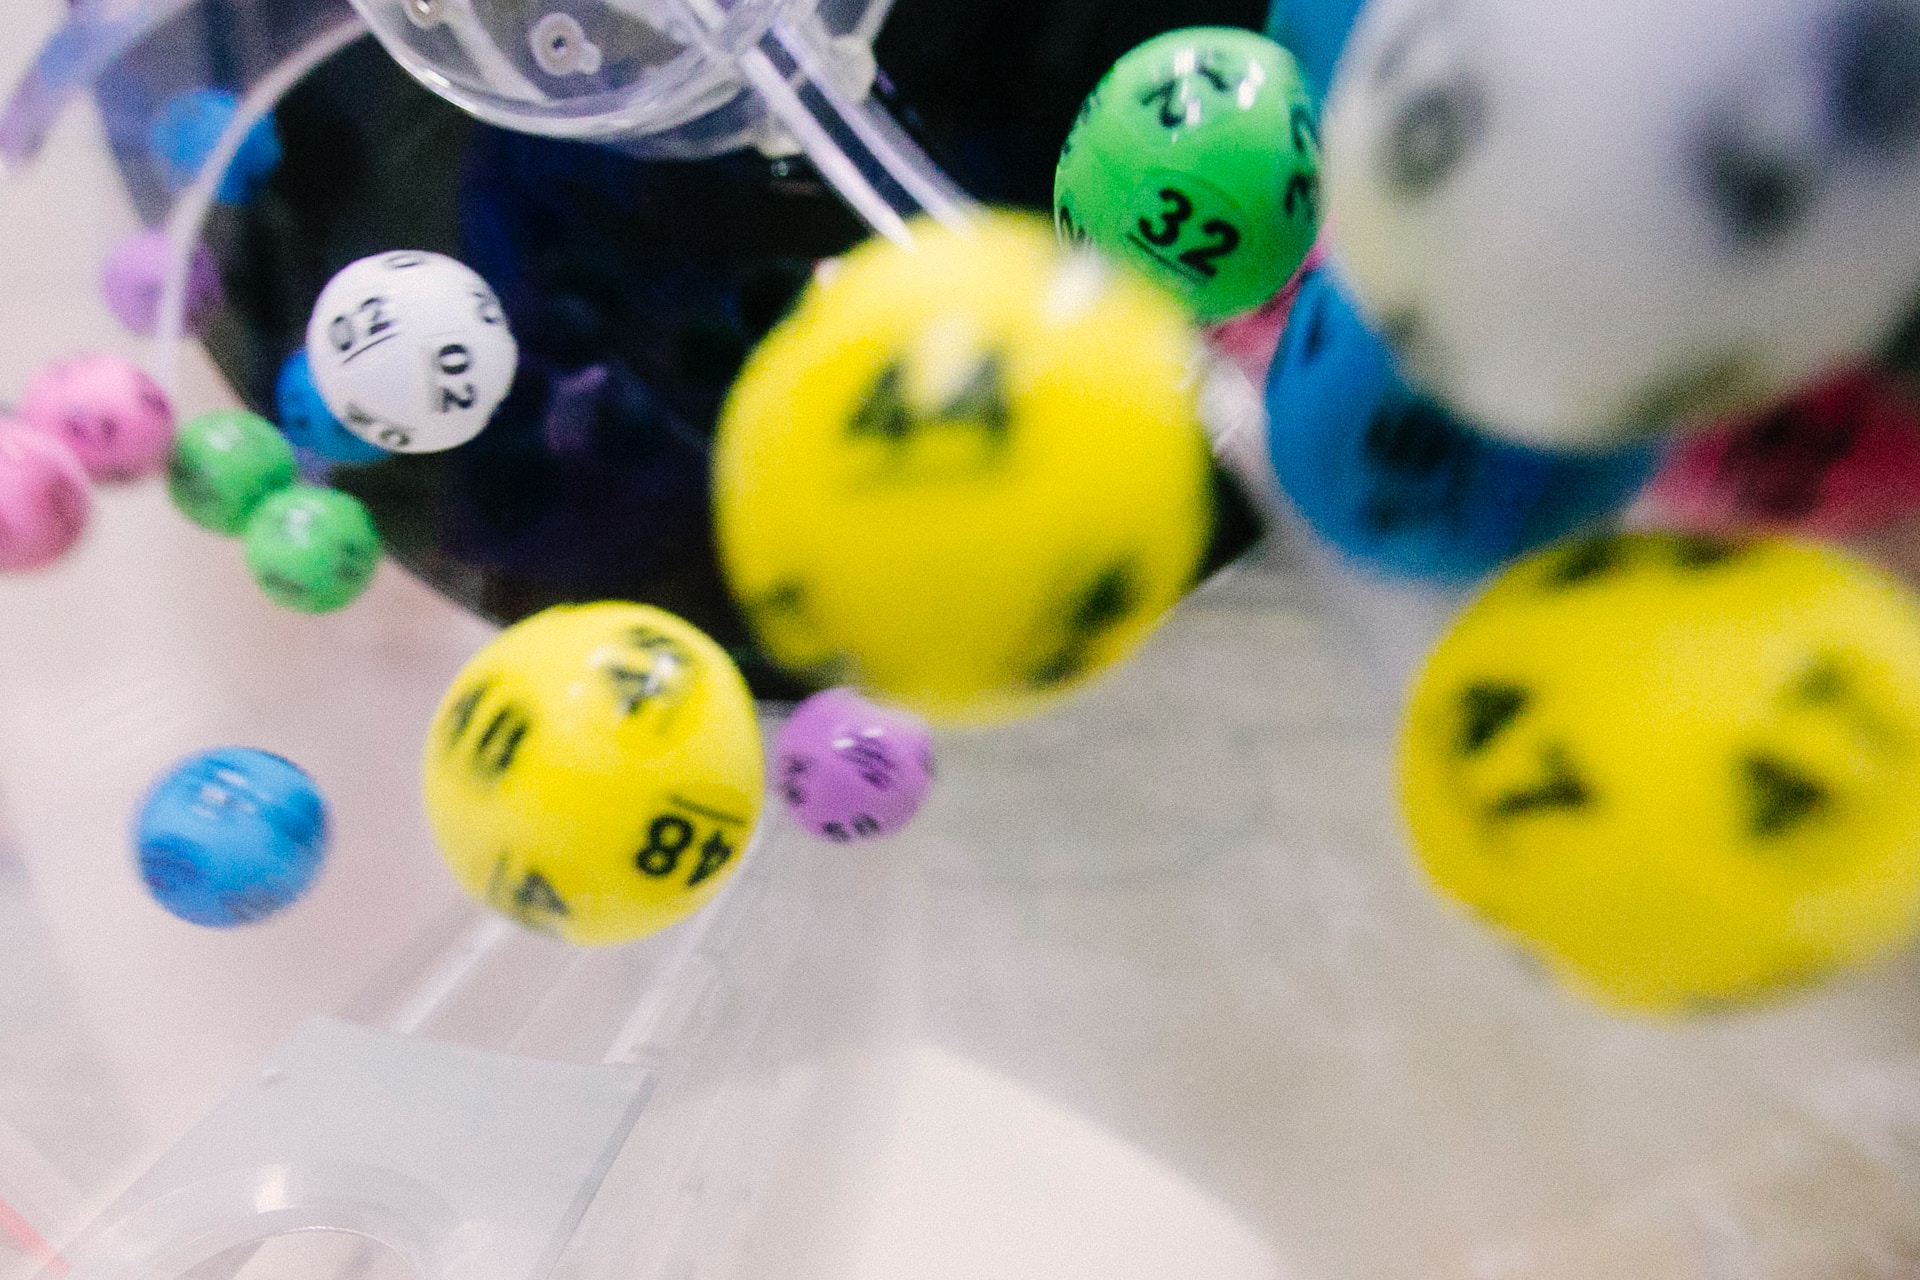 Lottery balls - image by dylan_nolte on Unsplash